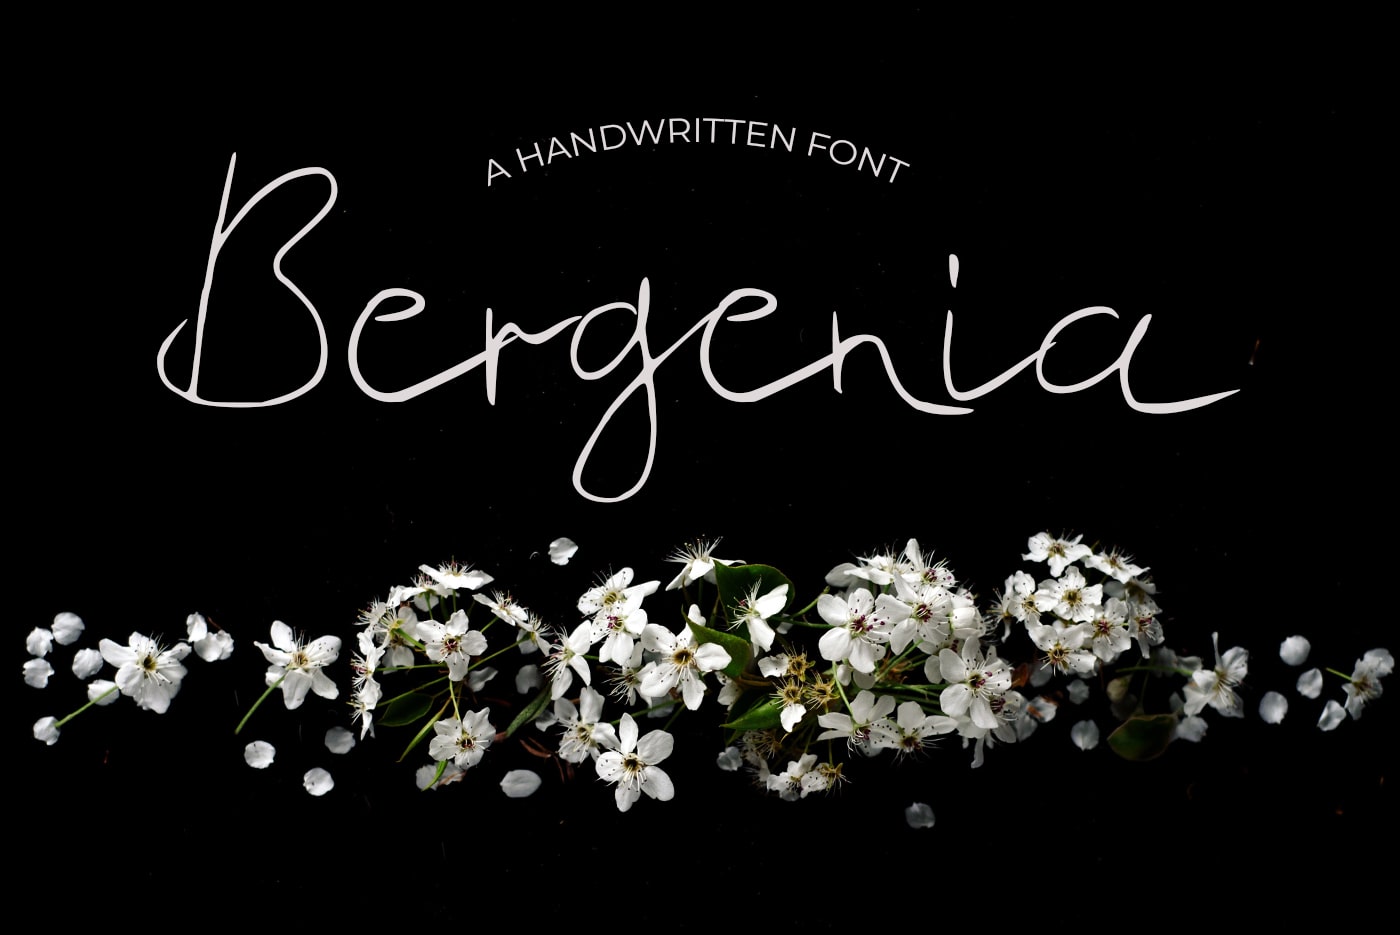 Black background with nice white flowers and italic font.